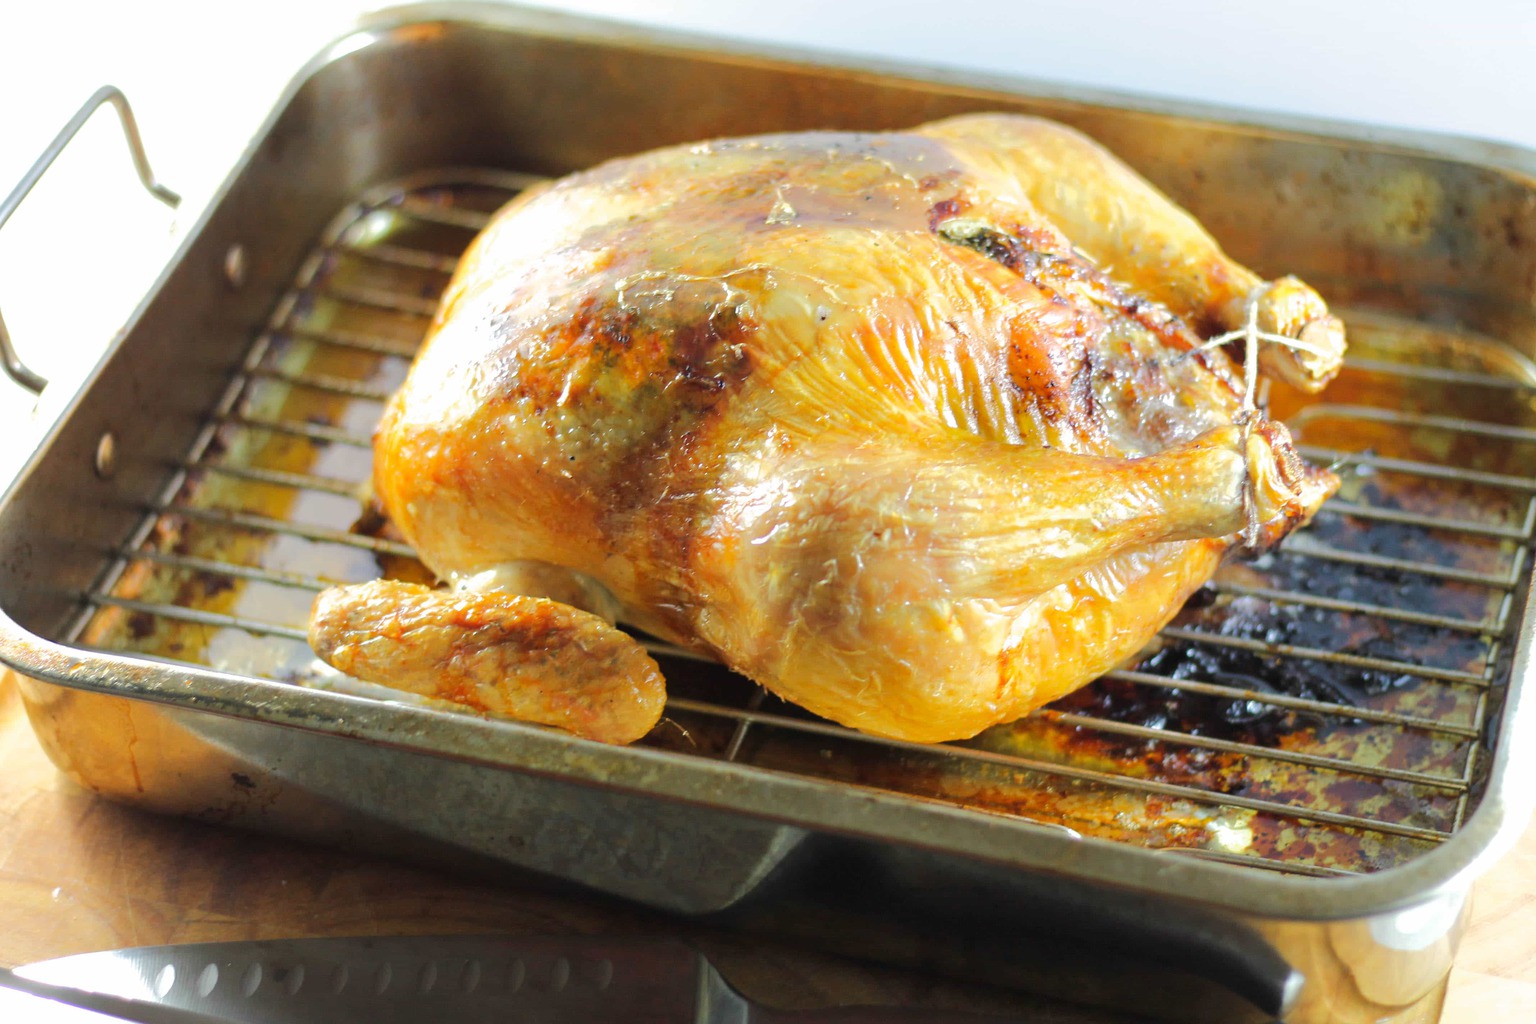 The Only Keto Roast Chicken & Stuffing Recipe You Need By Aussie Keto Queen. Keto roast chicken stuffing, How to cook roast chicken, temperature for cooking roast chicken, best roast chicken, roast chicken stuffing, keto stuffing. A delicious roast chicken recipe using herb butter and keto friendly stuffing that the whole family will love! Recipe uses a 1.6kg chicken but can easily be scaled. 